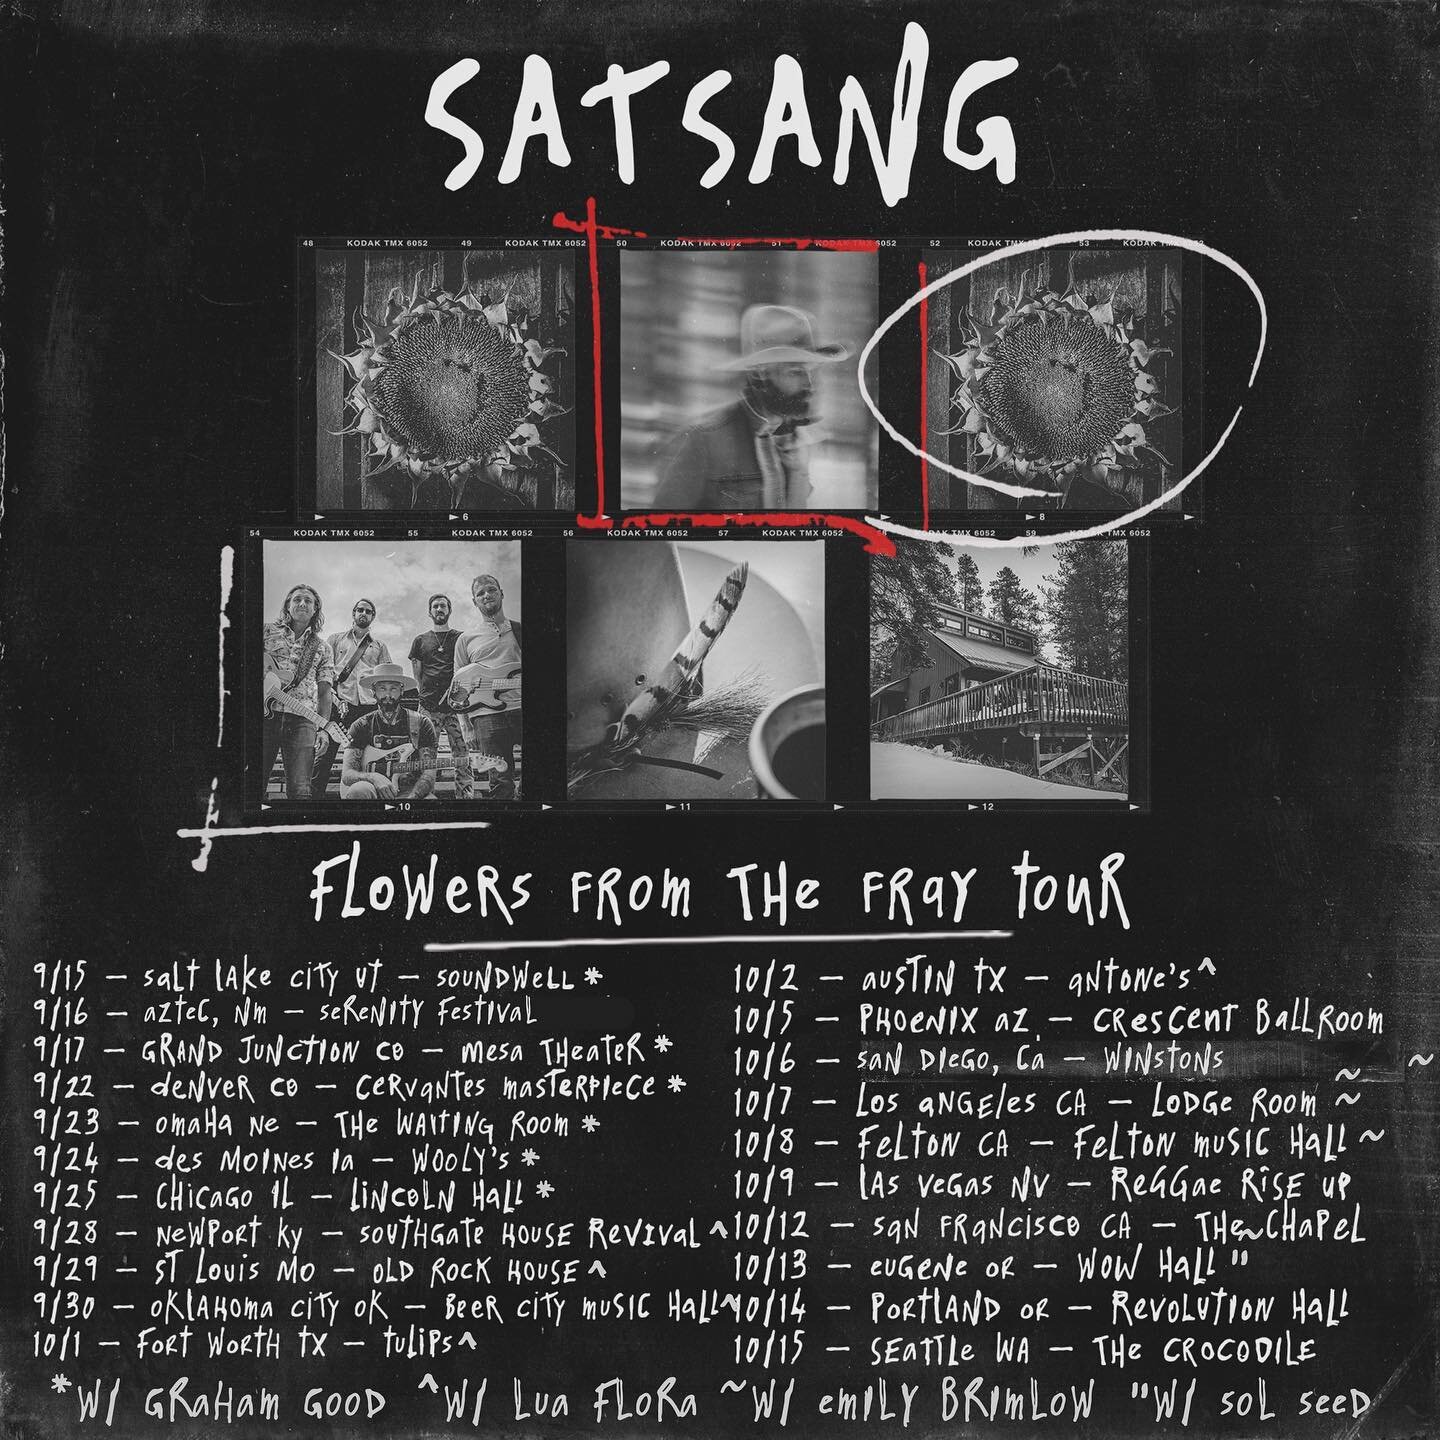 Tour is ramping up and the band is killing! If we&rsquo;re near you, come see us! This crew is the best! 🦂❤️
Also, check out the new @satsang album Flowers From the Fray, if you like music made by musicians it&rsquo;ll treat ya right. #satsang #mont